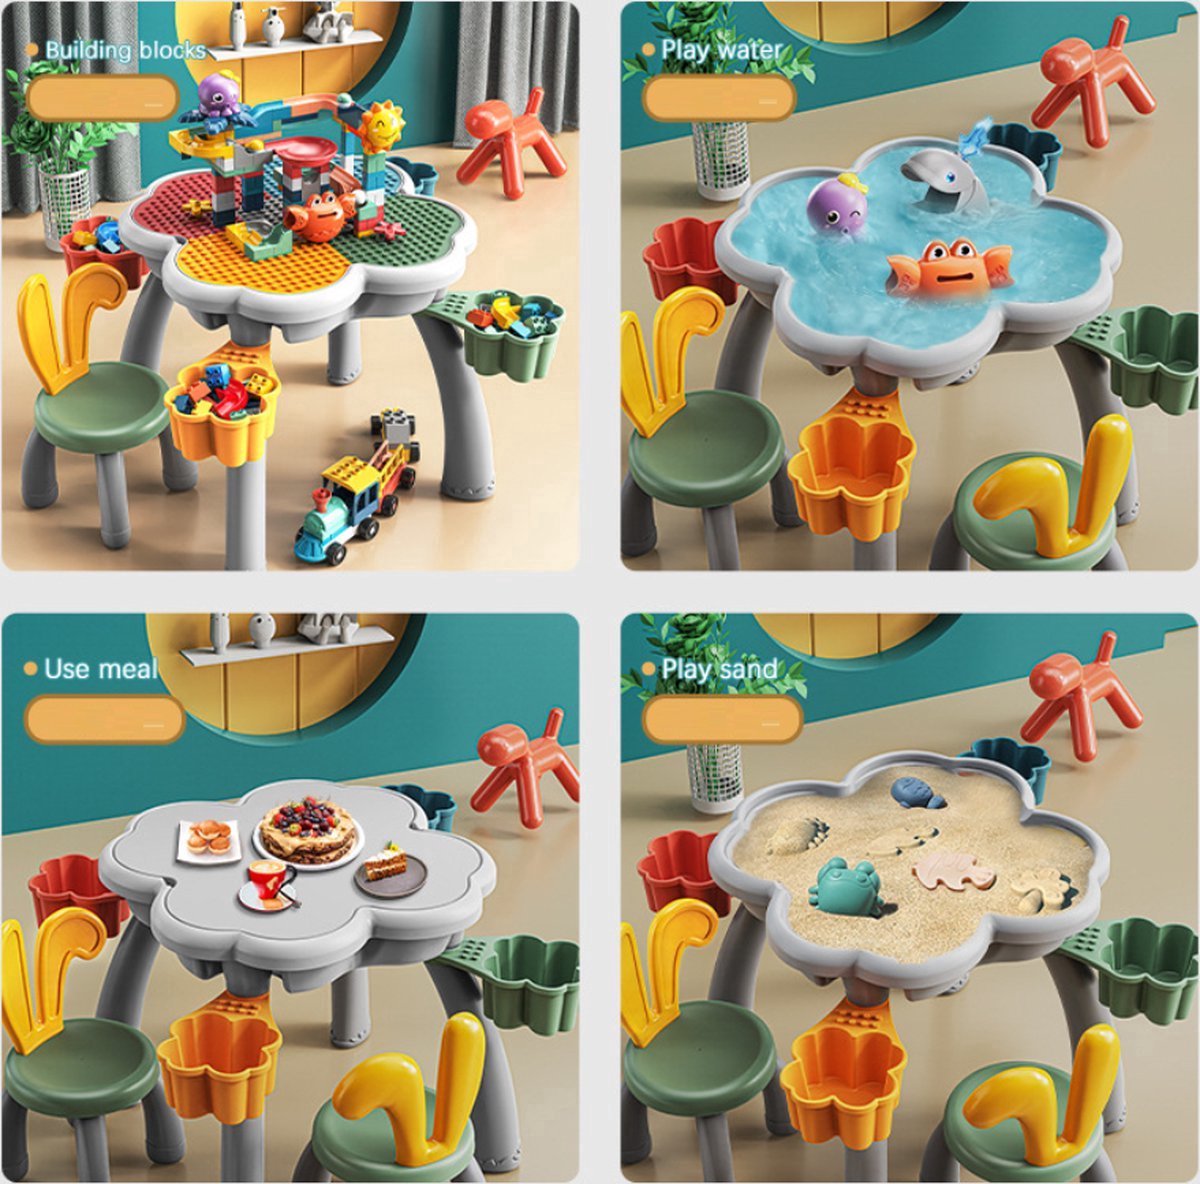 Play table set "Flower" - table compatible with DUPLO + 152 piece marble race track + 1 bunny chair